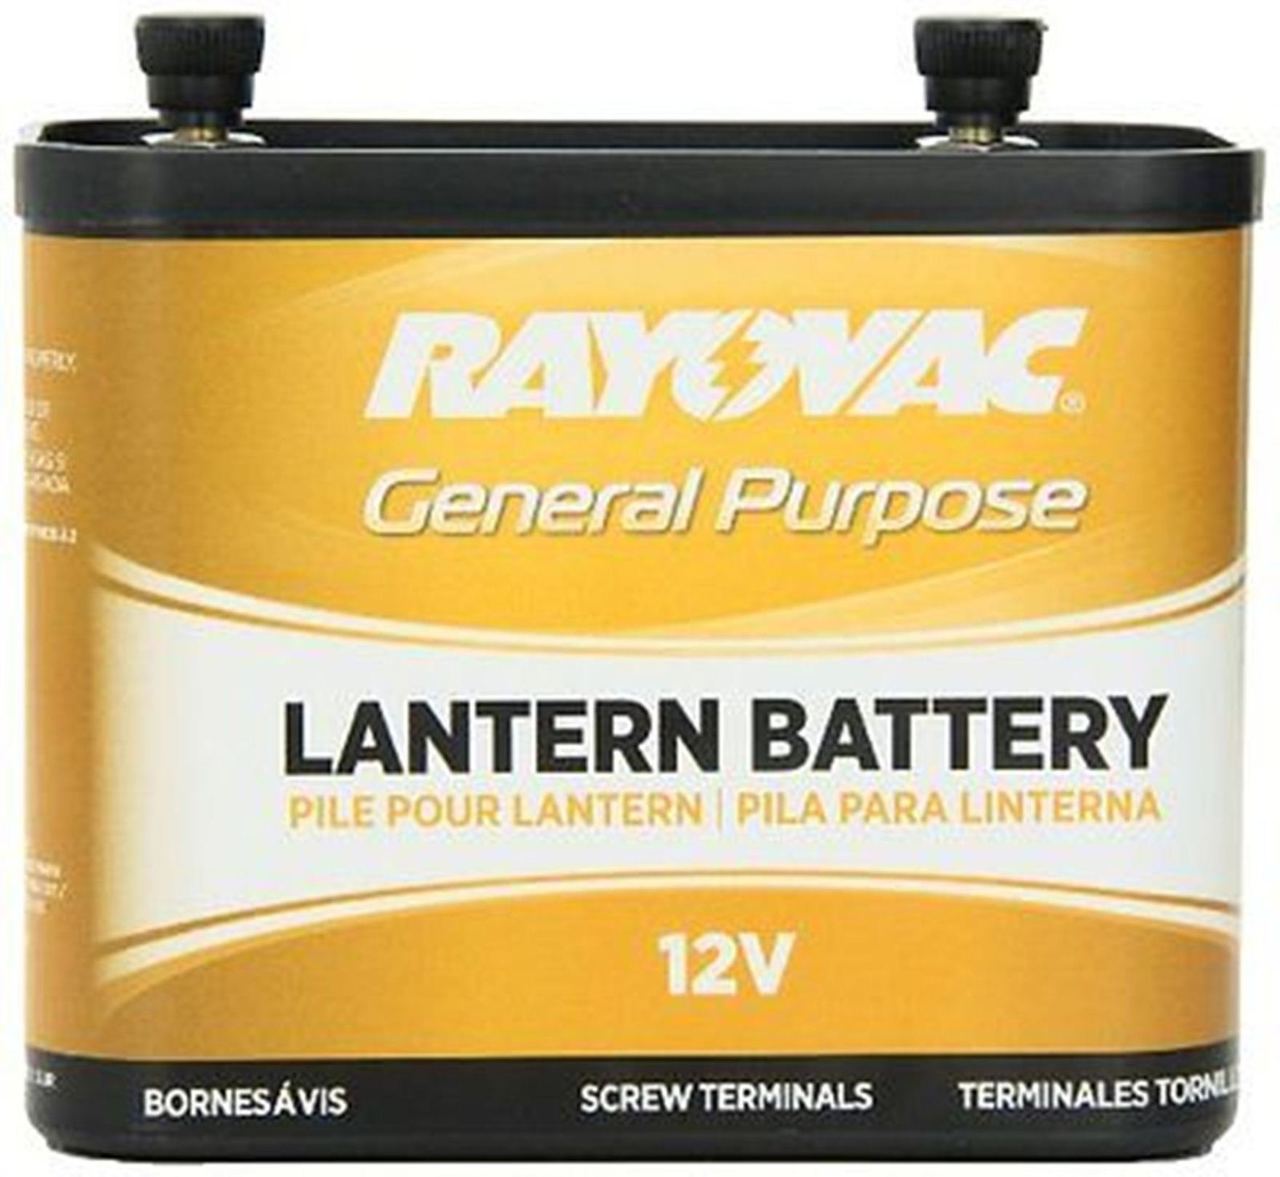 Rayovac 926  12V Alkaline Lantern Battery With Screw Terminals + FREE SHIPPING